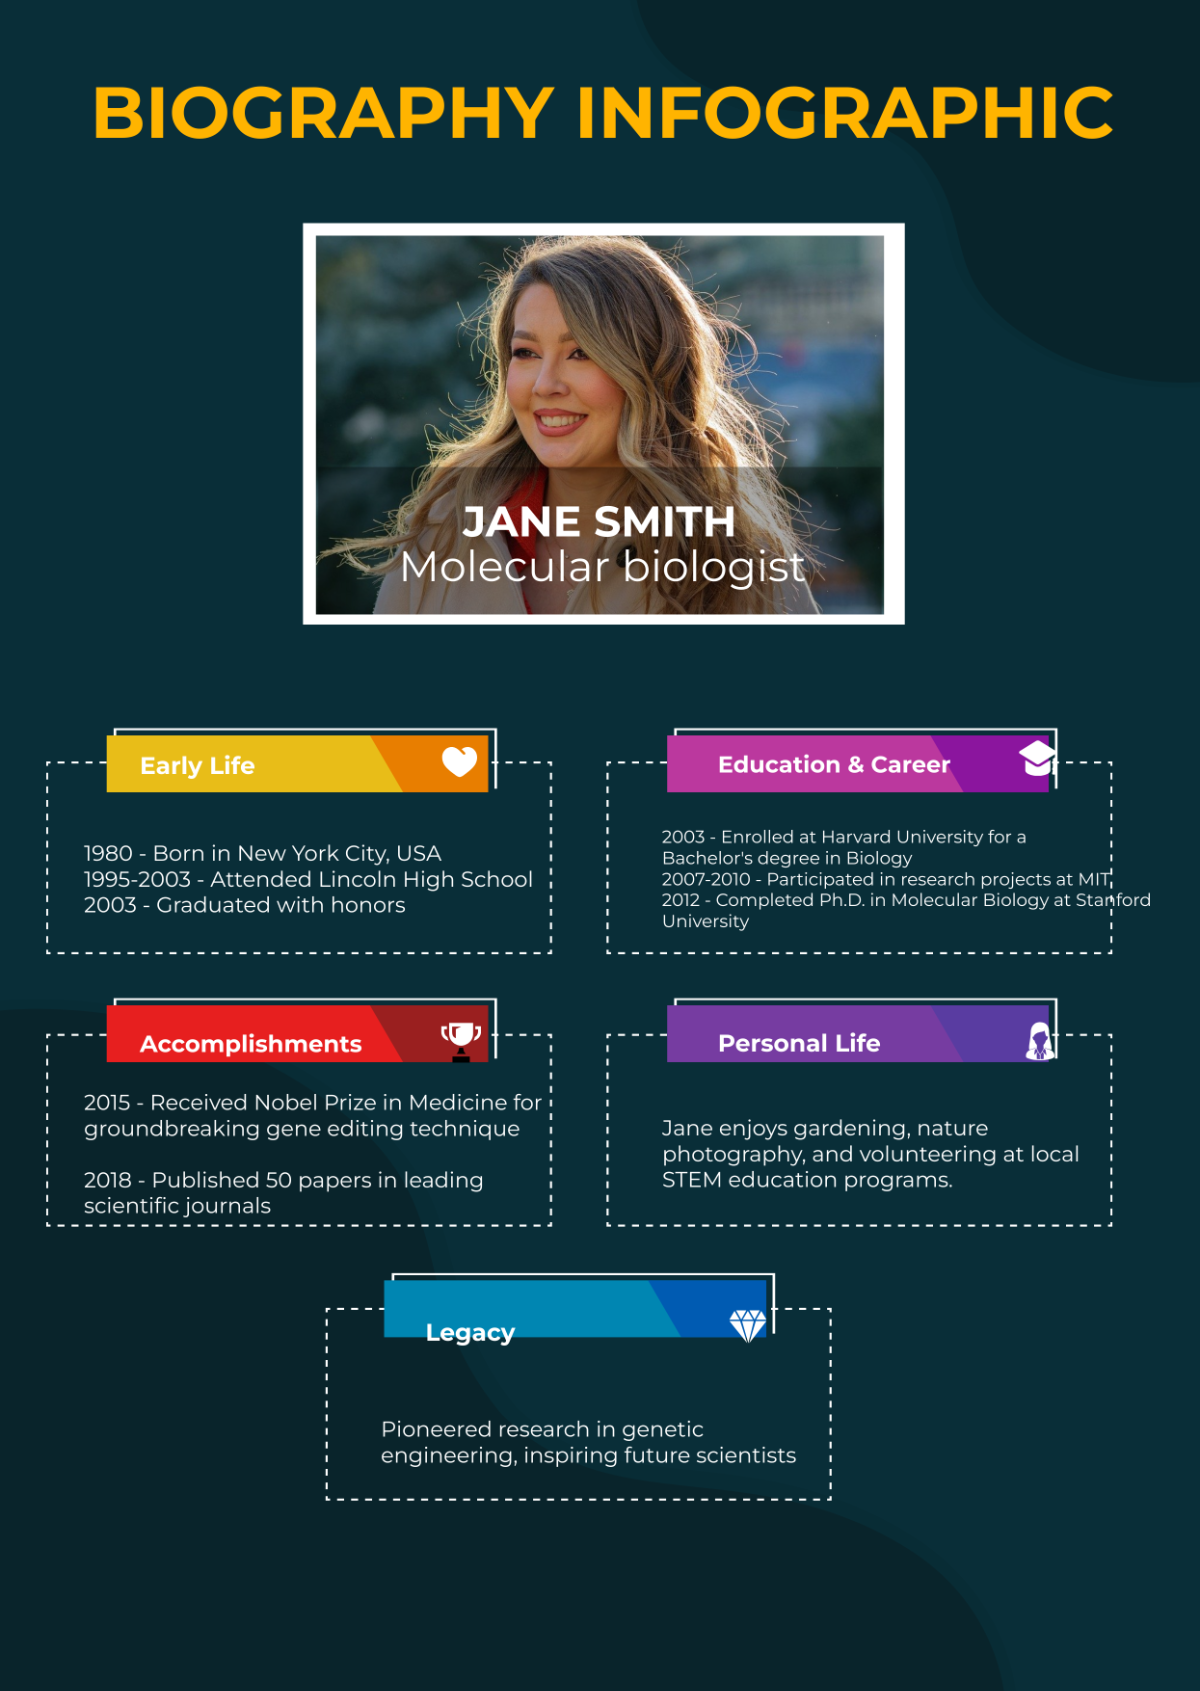 Biography Infographic